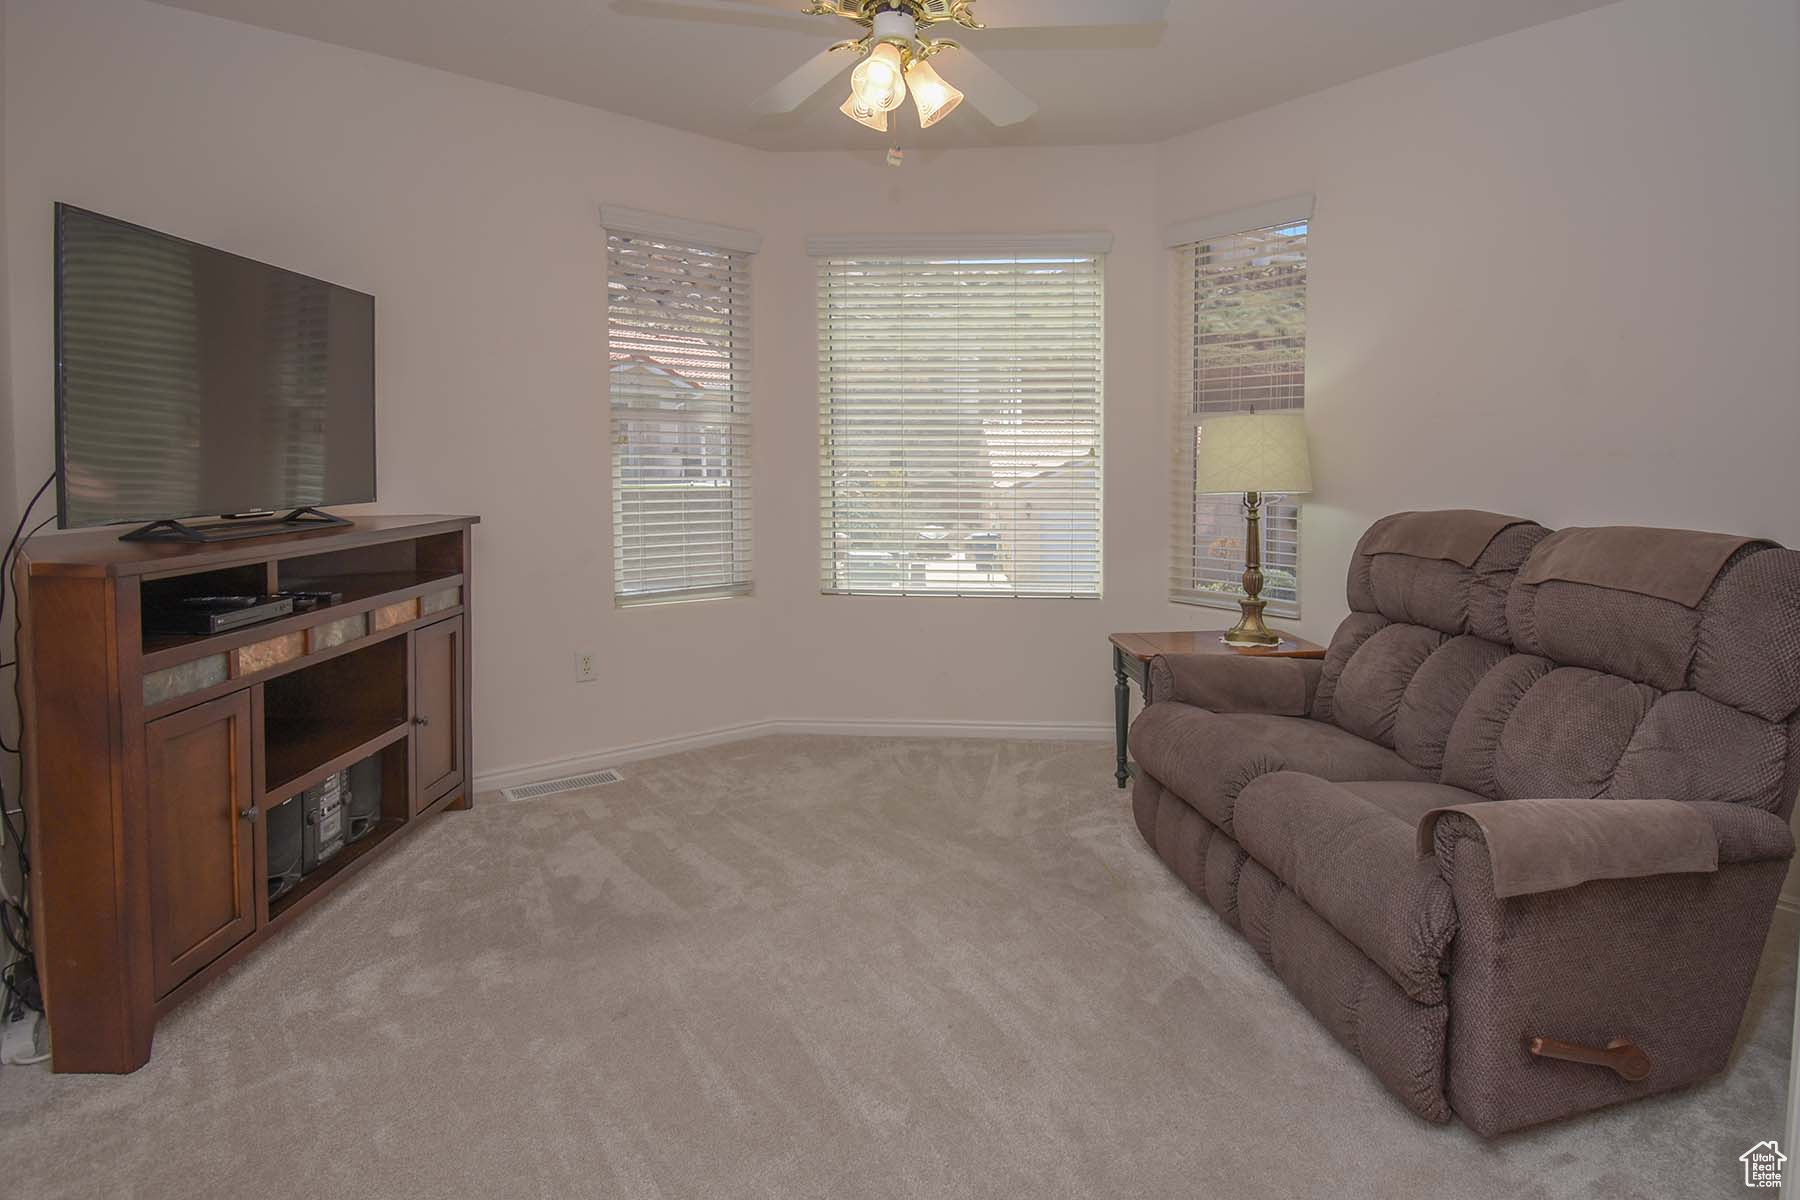 Living area featuring ceiling fan and light colored carpet. Can be a bedroom, office or den